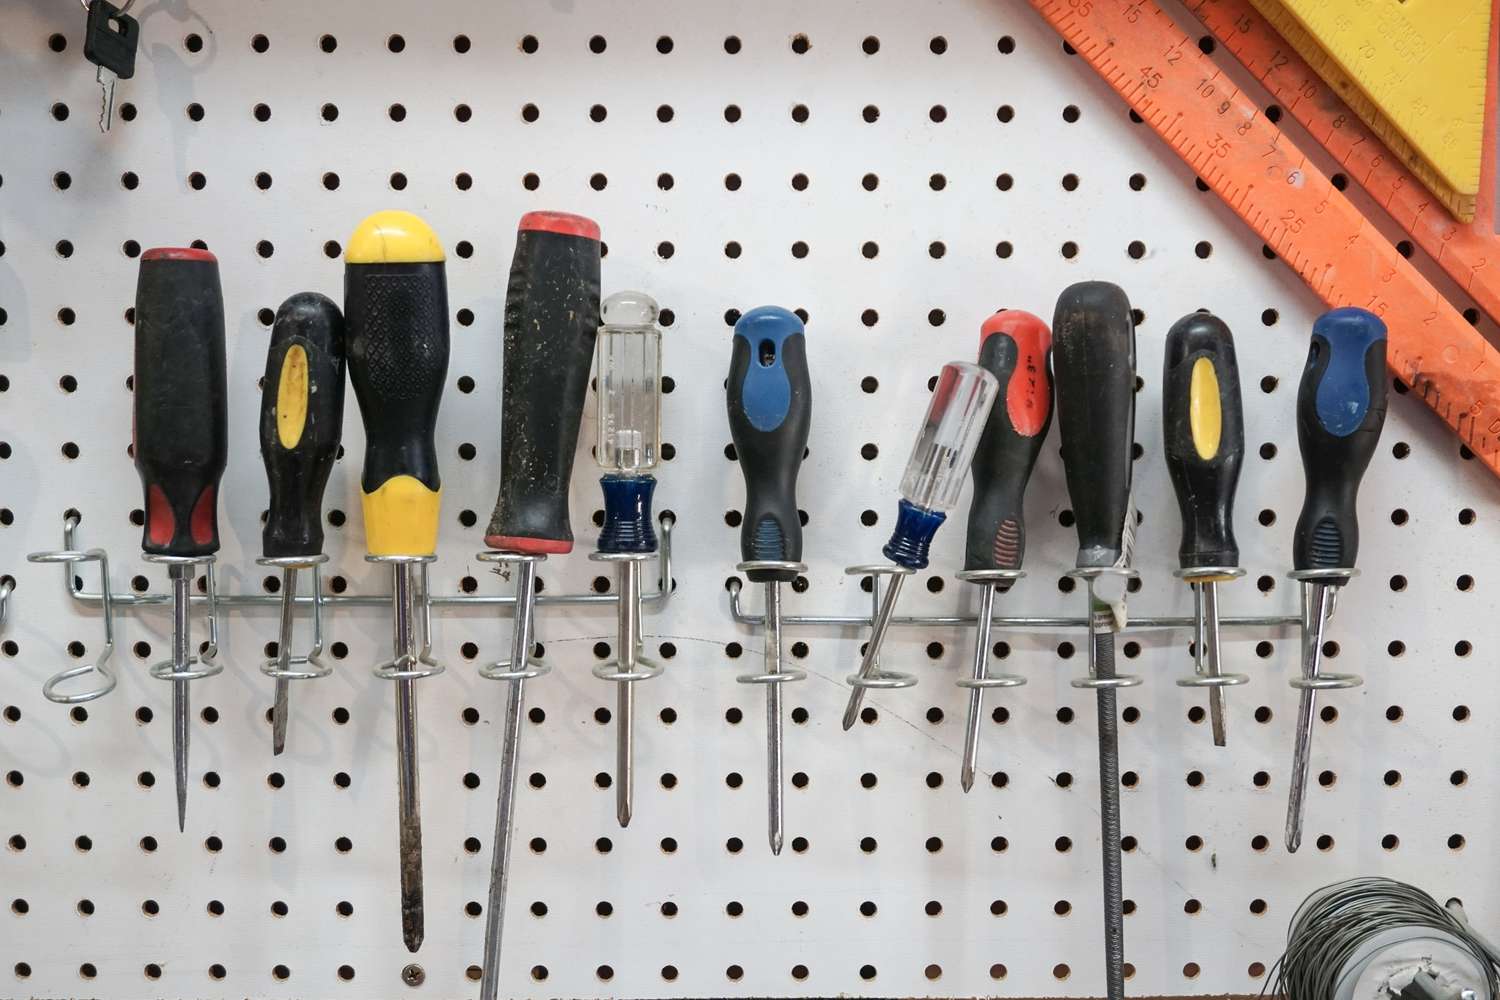 How To Store Screwdrivers